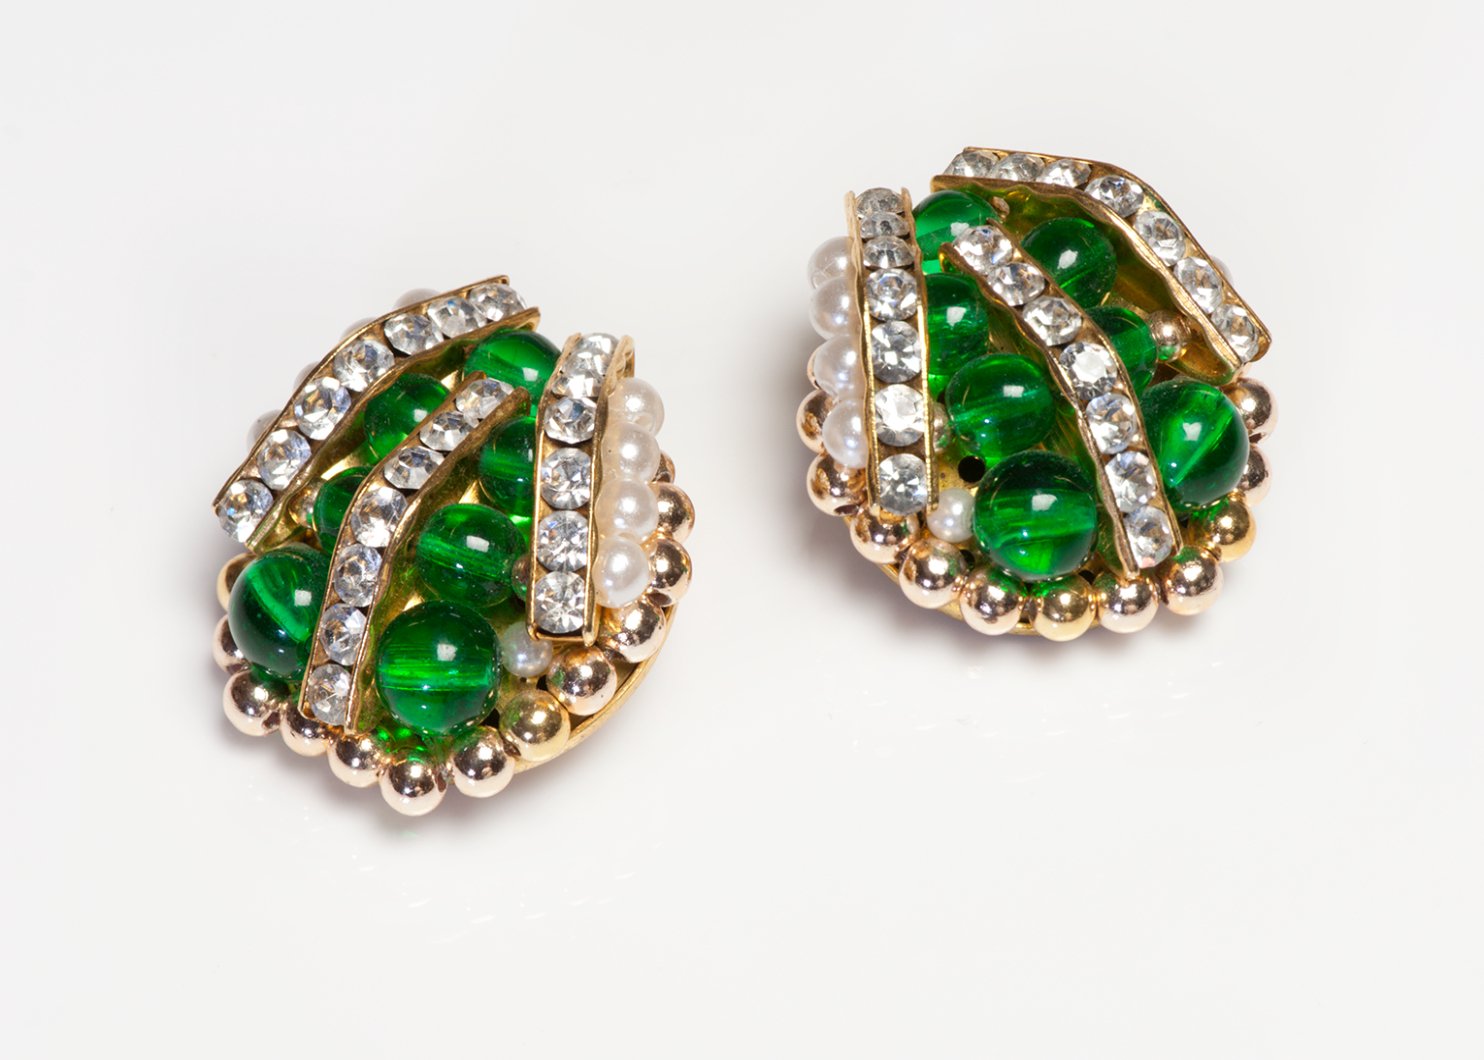 Vintage 1950's French Green Beads Faux Pearl Crystal Earrings